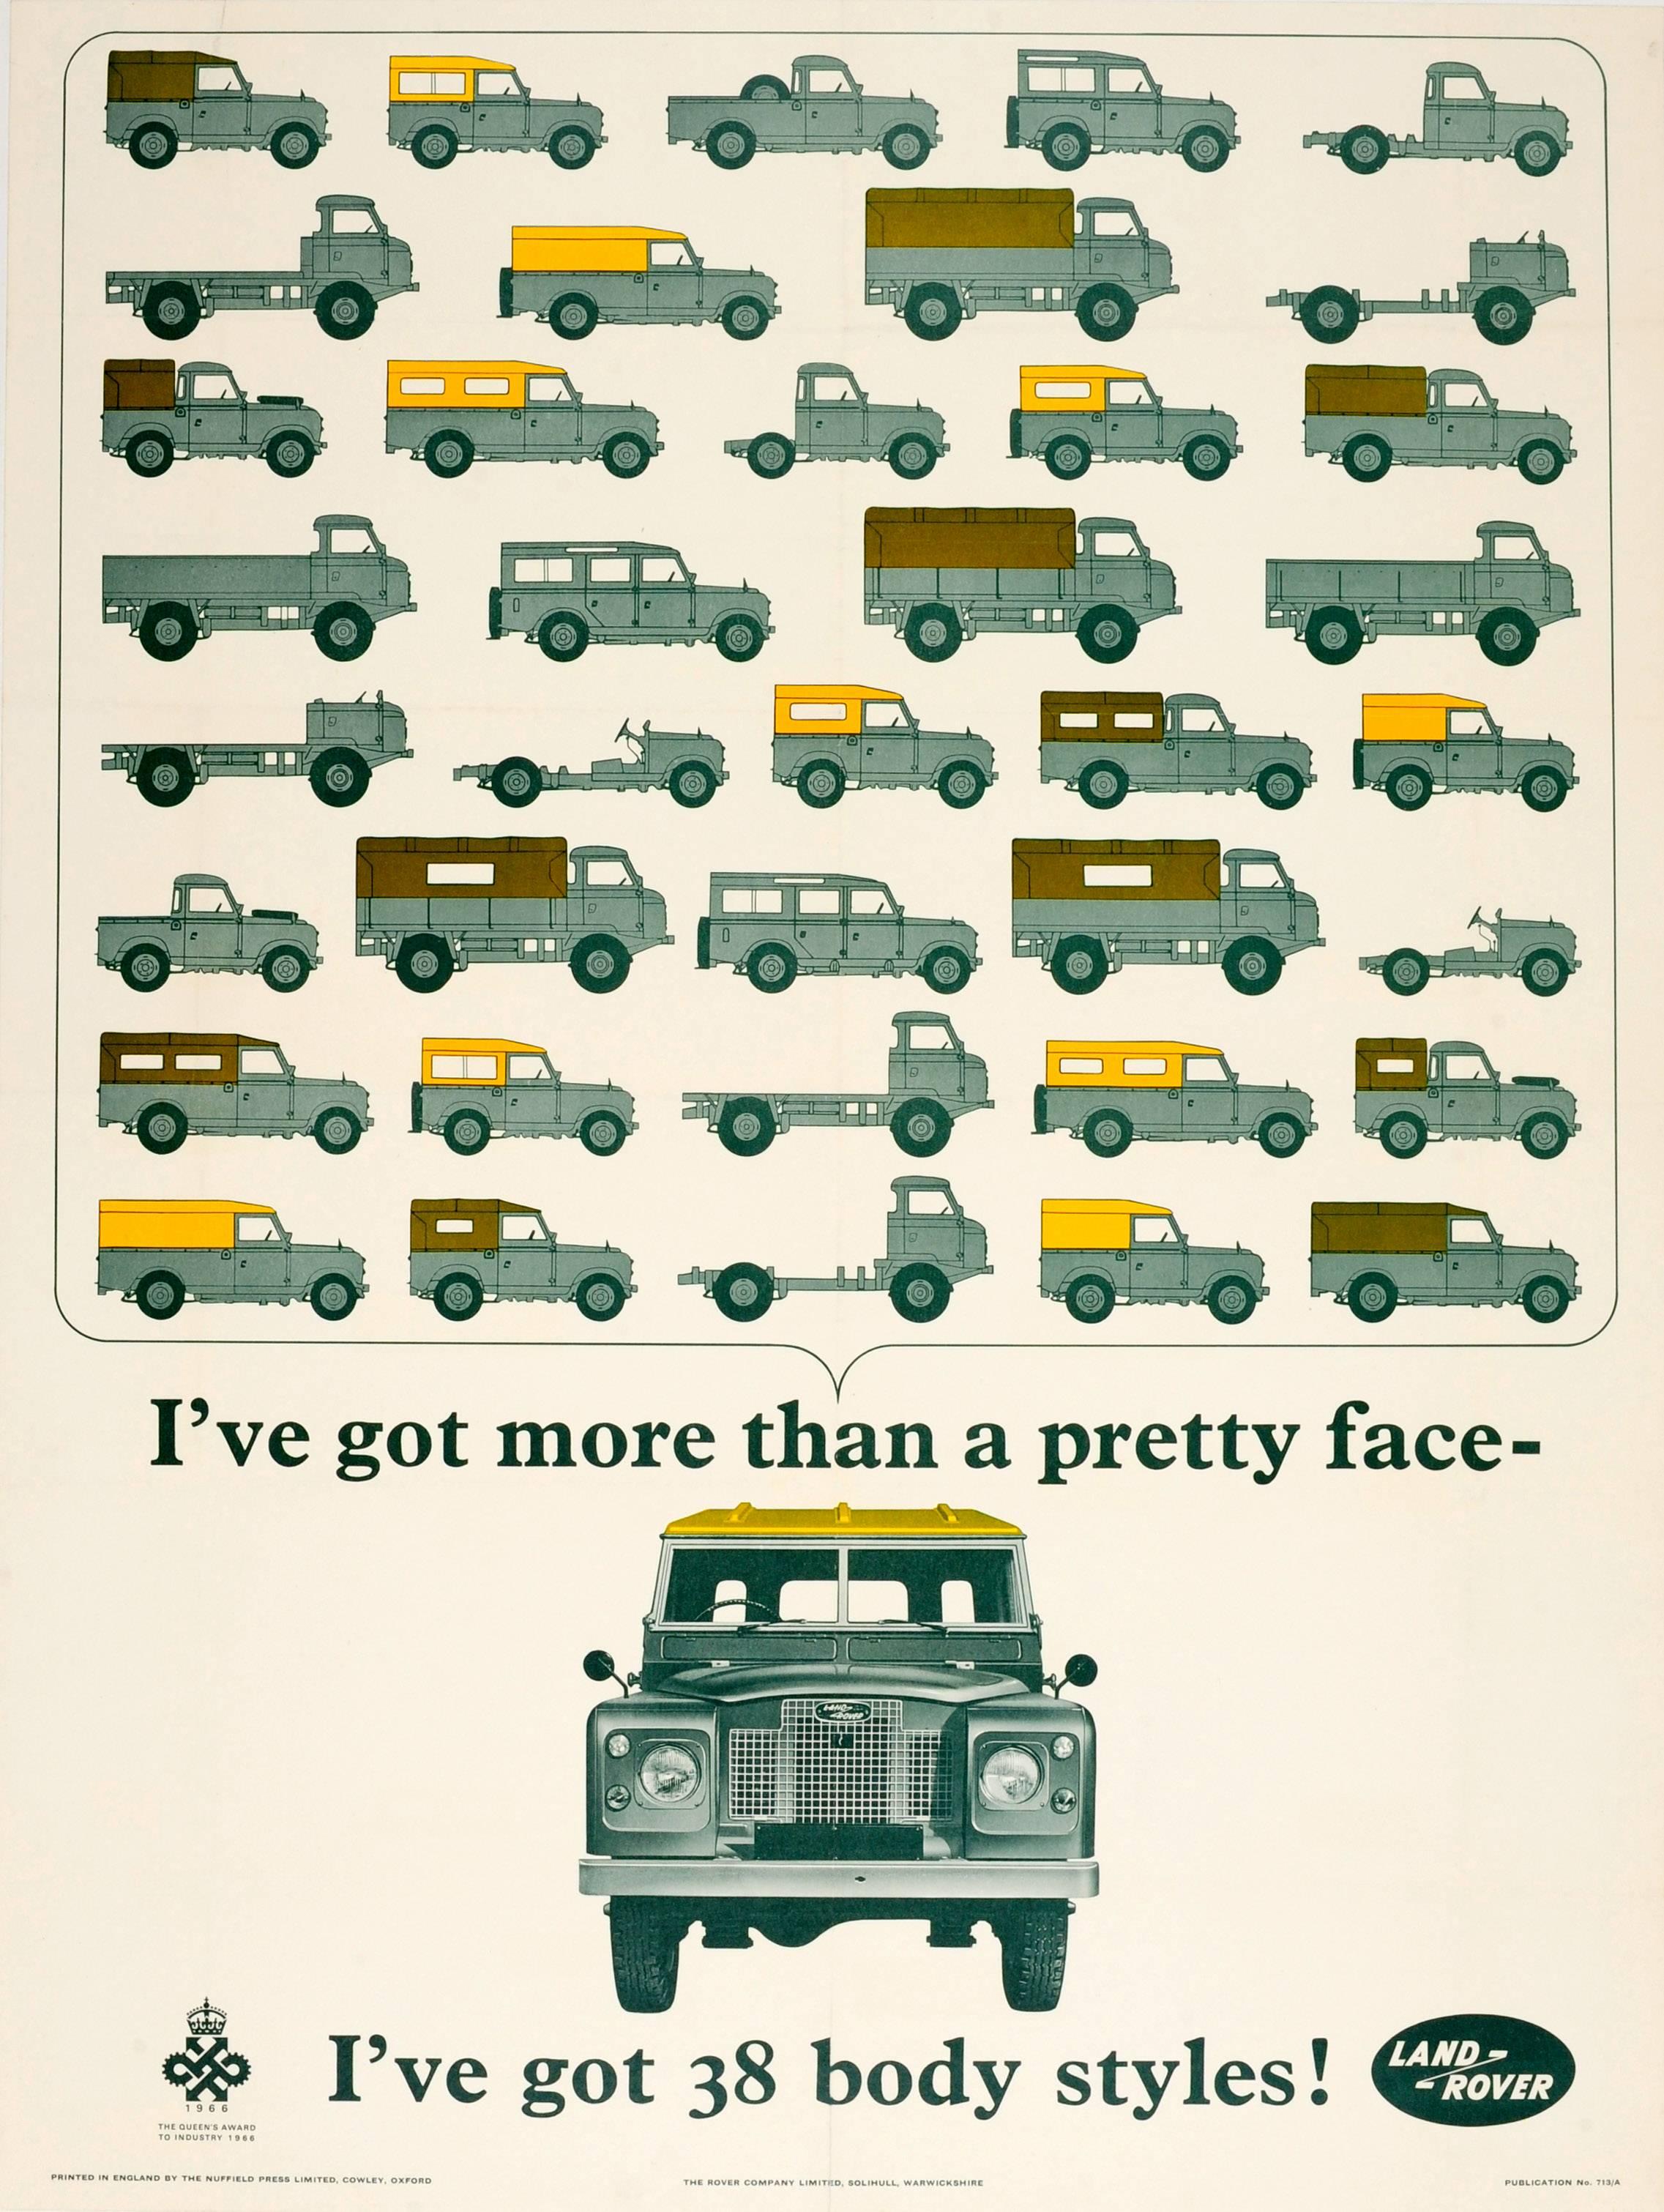 Unknown Print - Original 1966 Land Rover Car Advertising Poster - More Than A Pretty Face...!